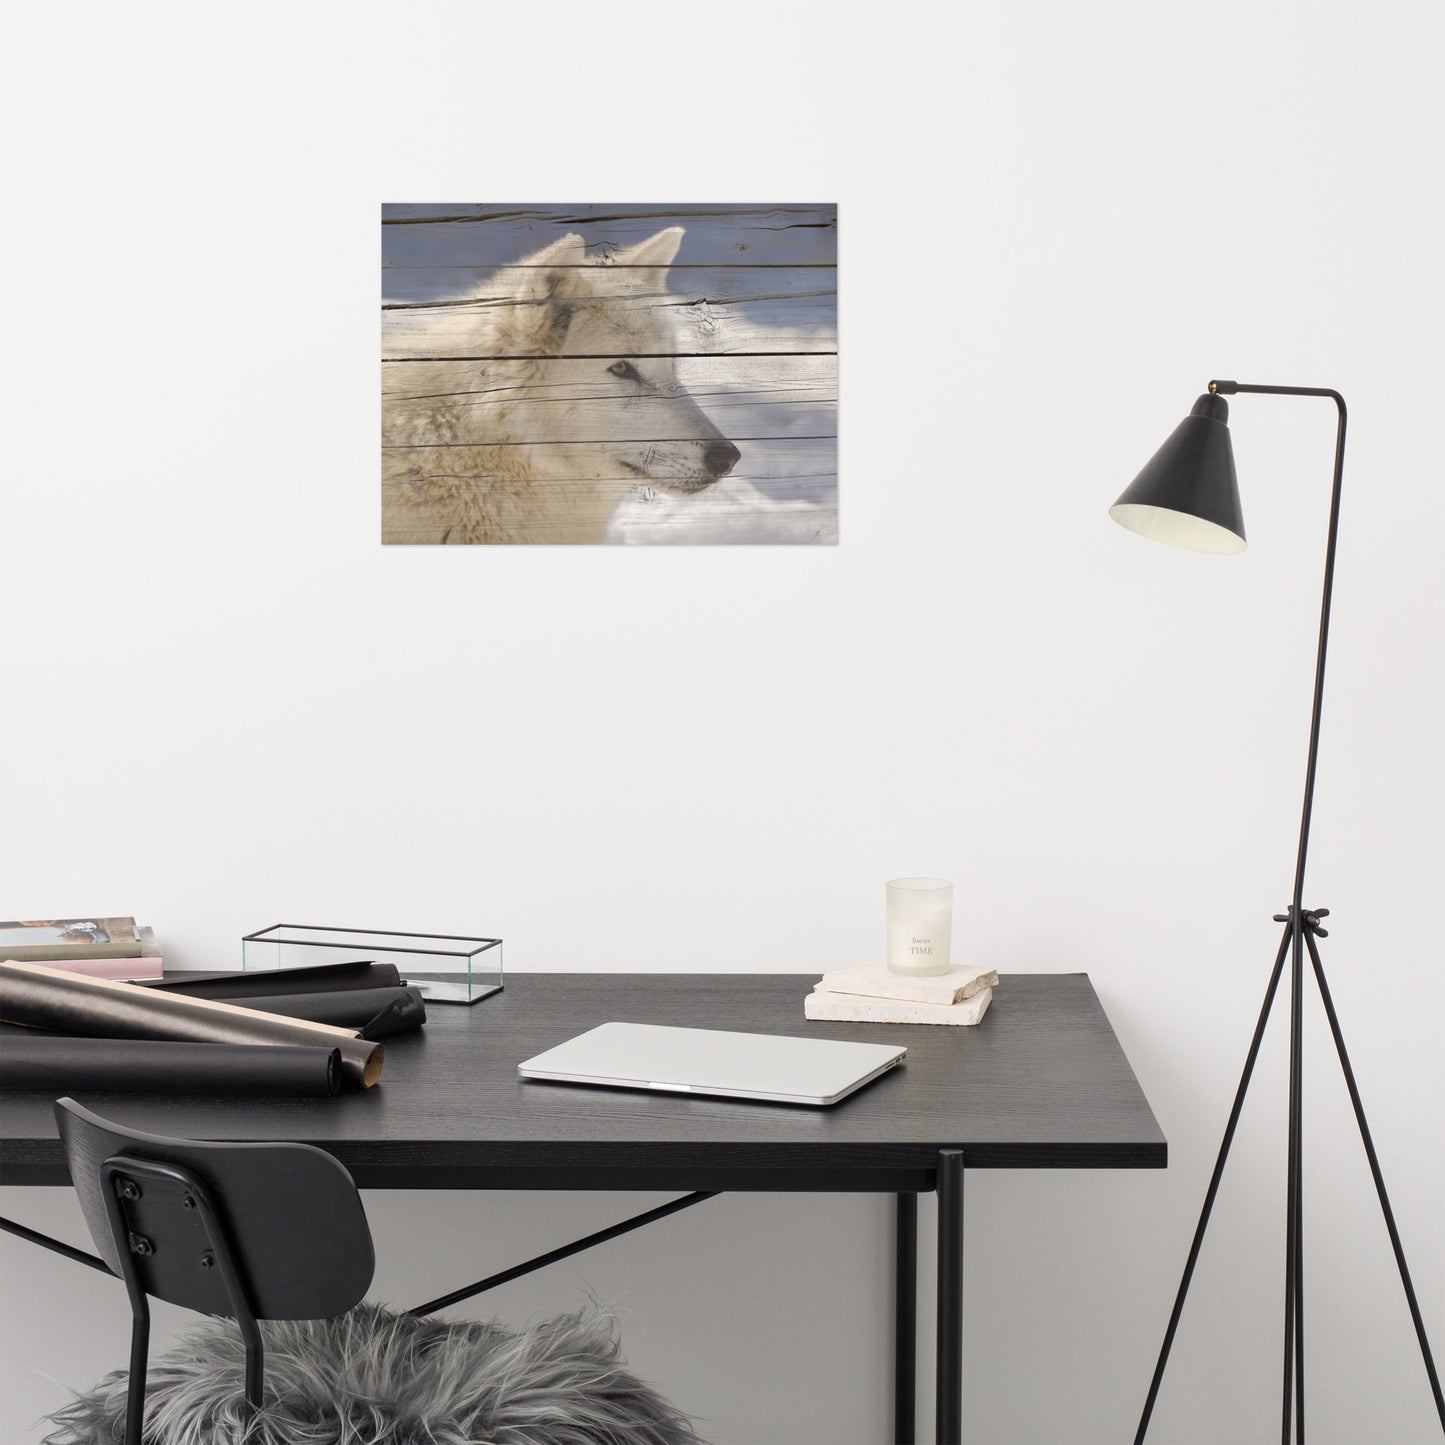 Rustic Wall Decor For Office: Aries the White Wolf Portrait on Faux Weathered Wood Texture - Farmhouse / Country Style / Modern Wildlife / Animal Photographic Artwork